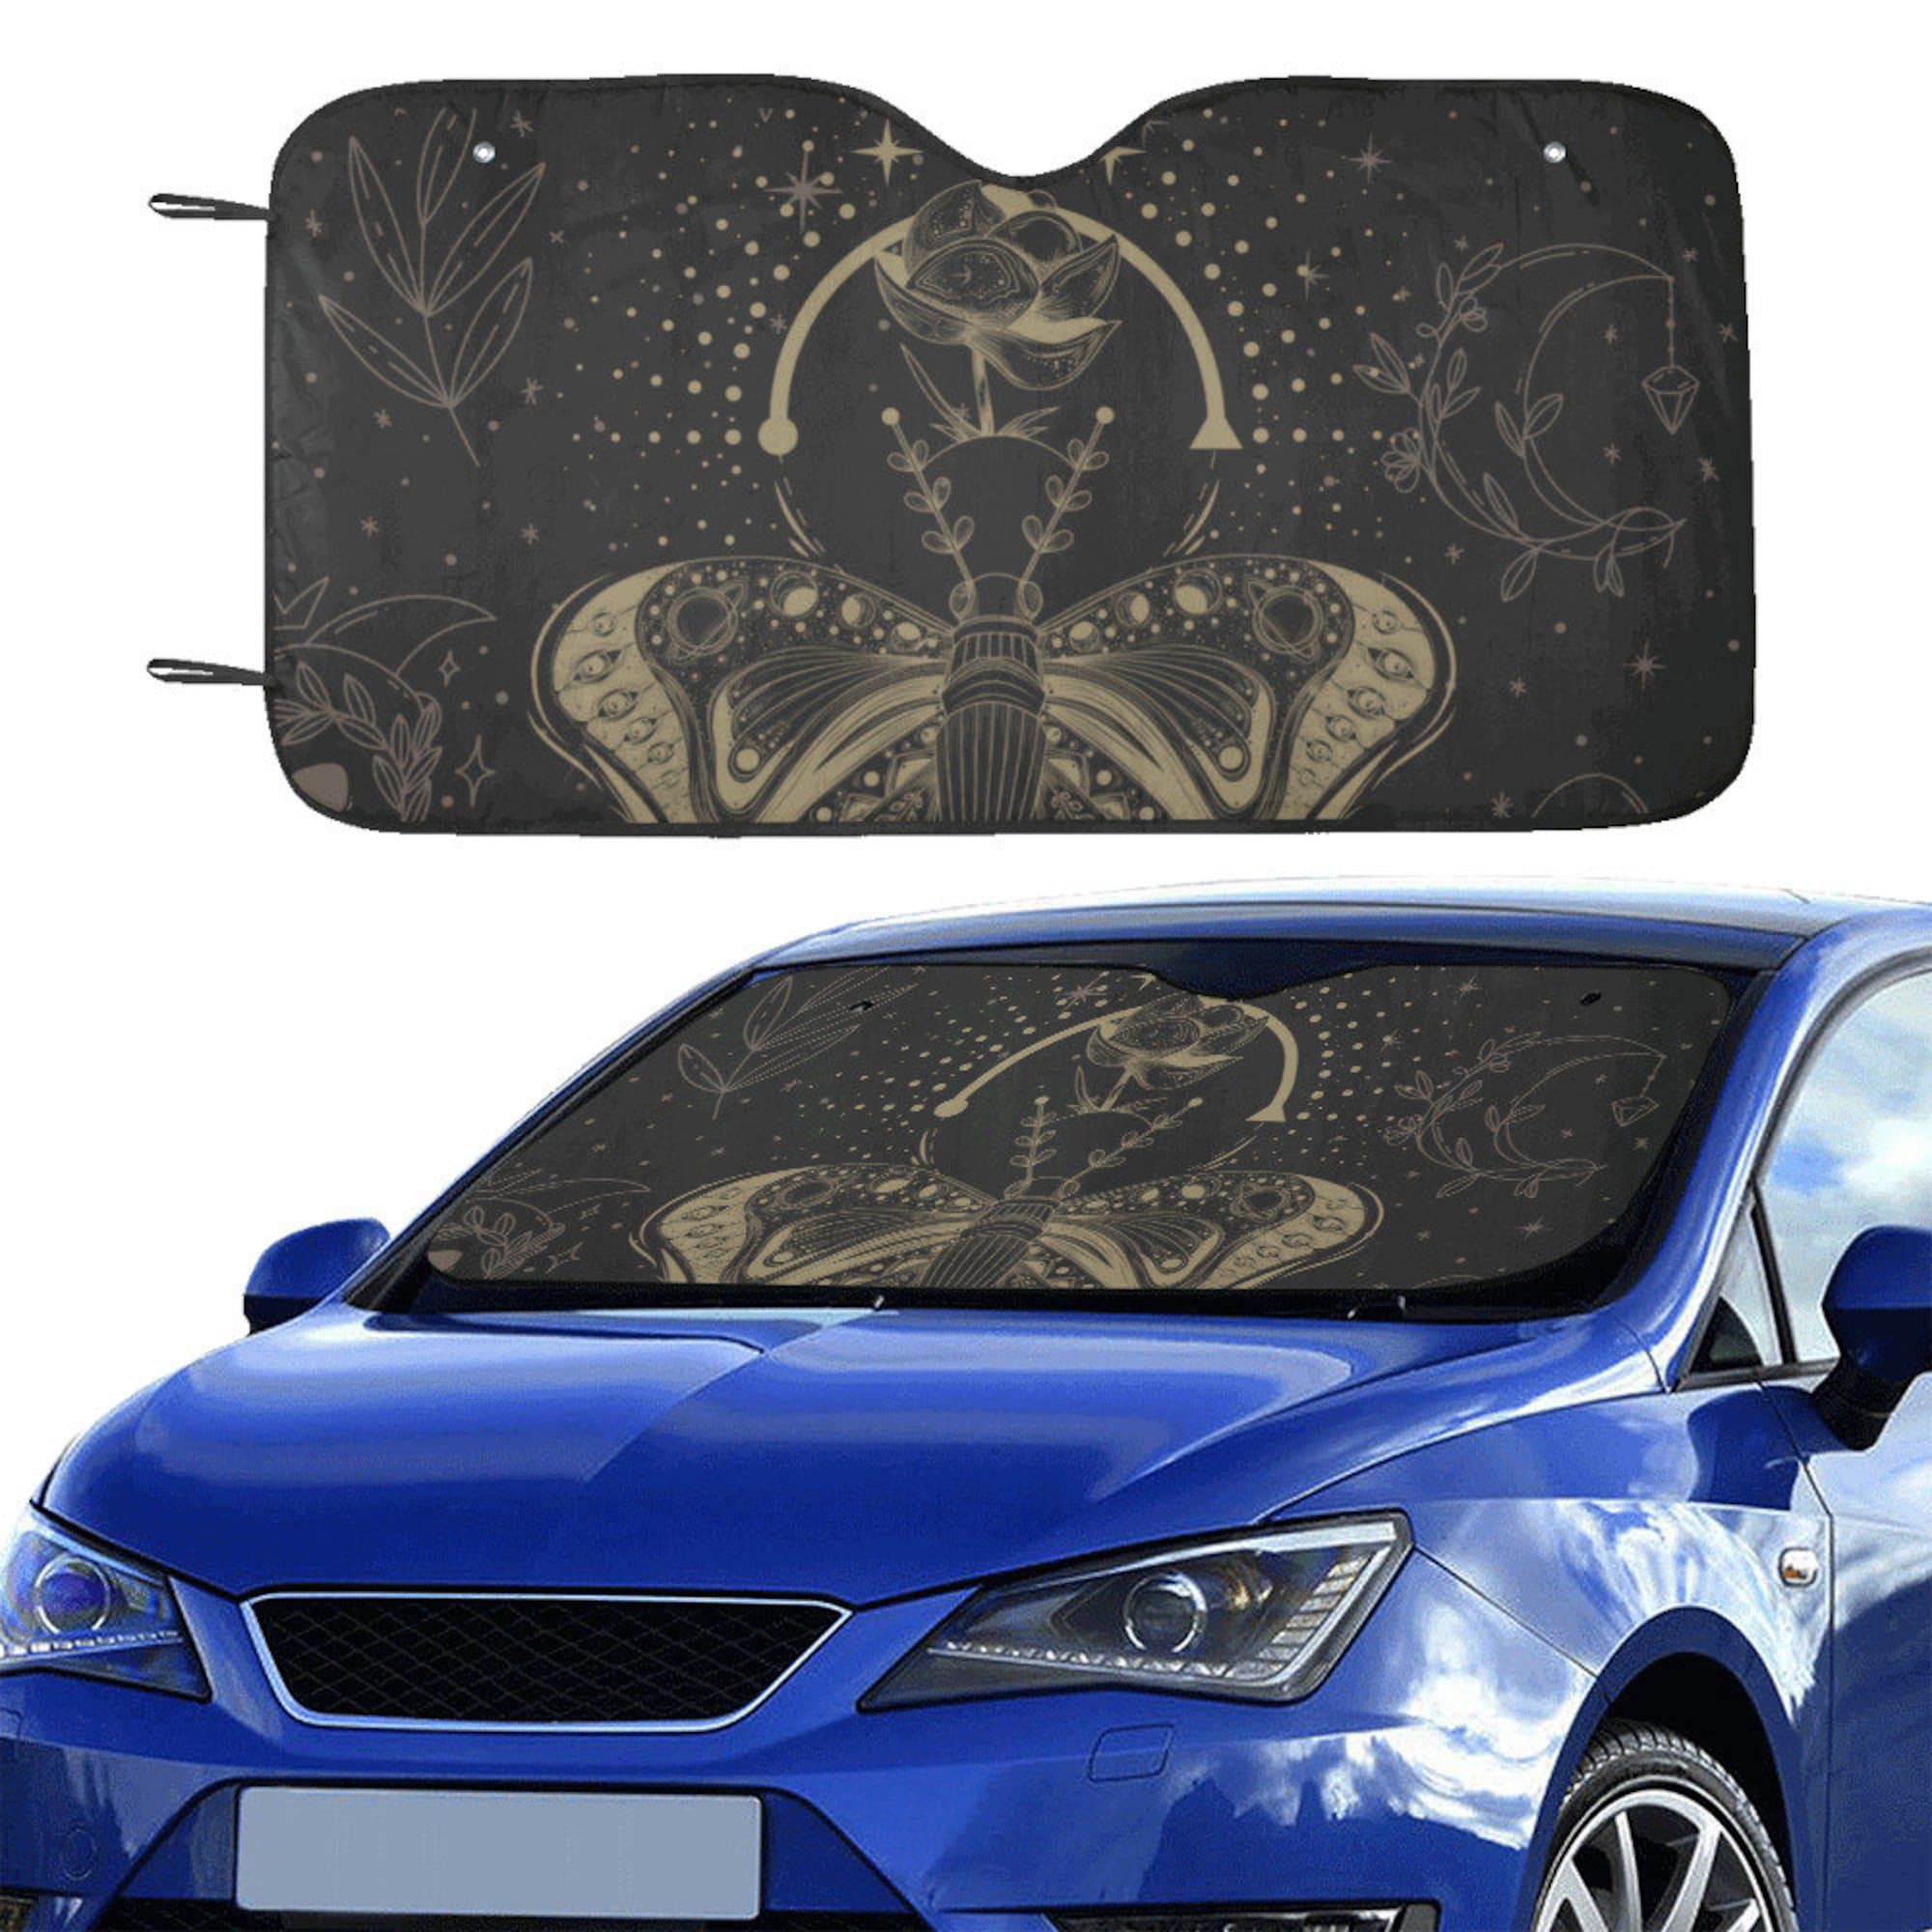 Discover Witch Moth Moonphase Lotus Car sunshade for windshield